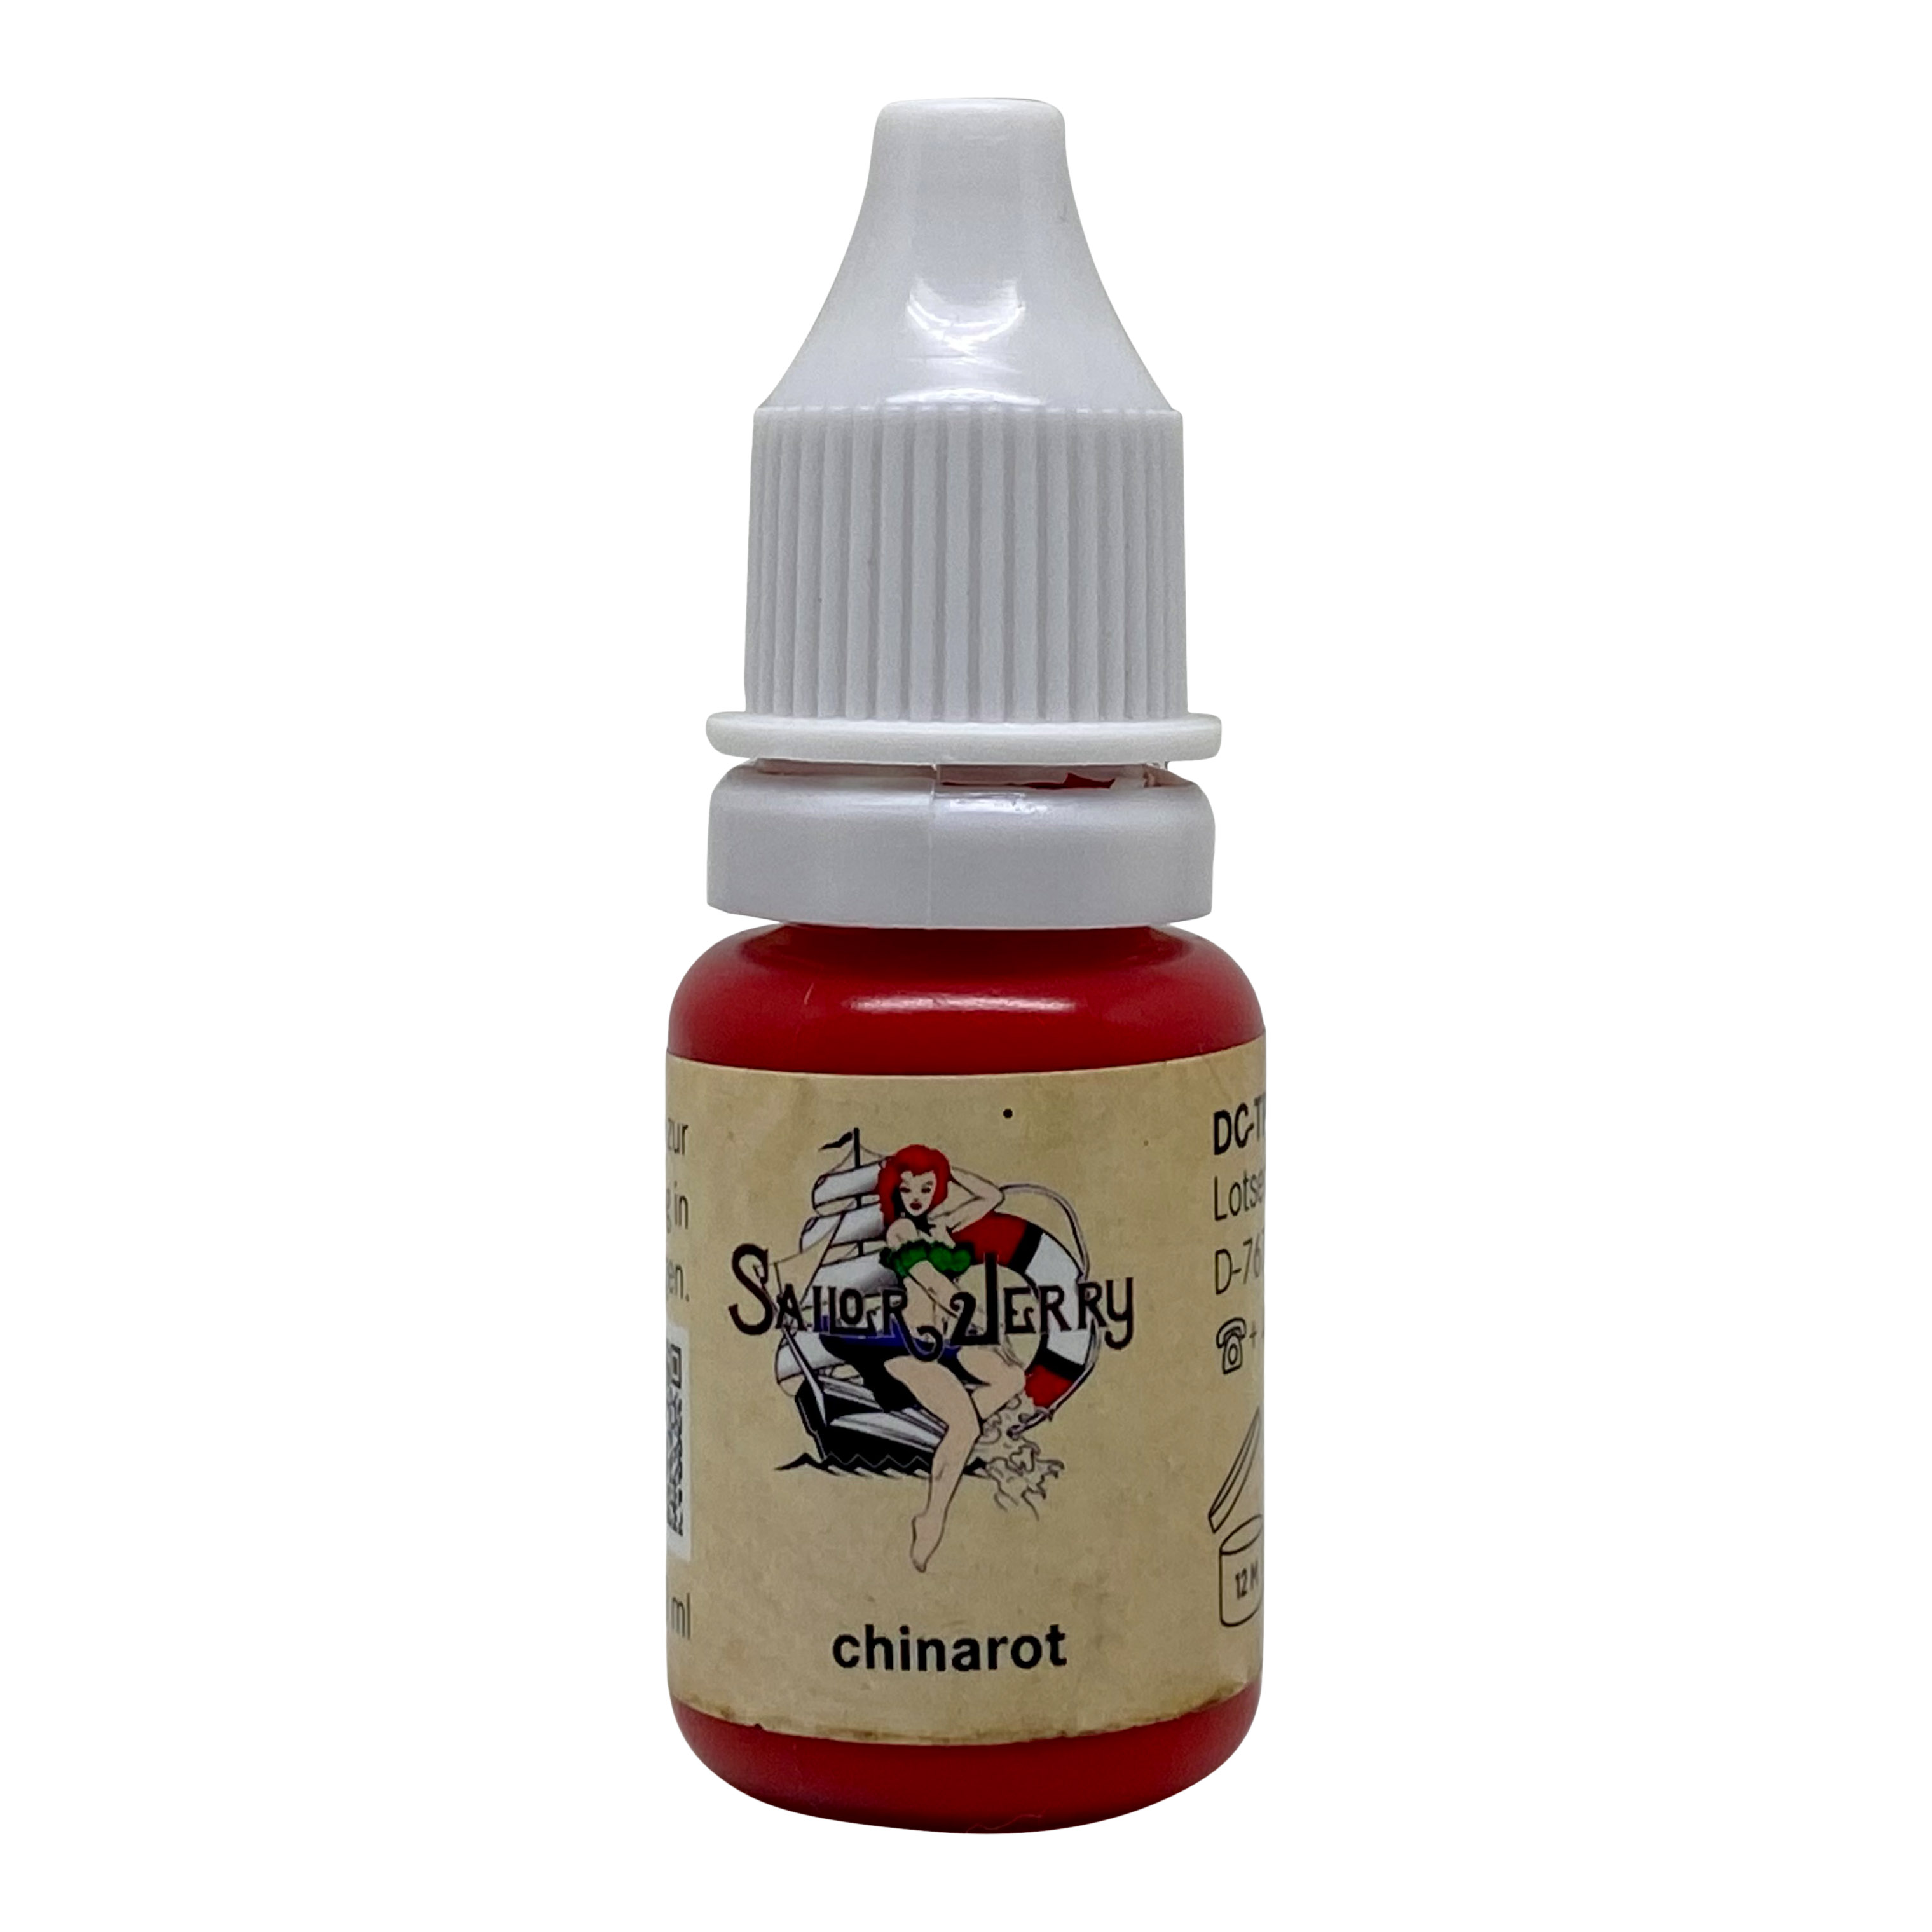 Preview: REACH-konforme Sailor Jerry Tattoofarbe, chinarot, 10ml